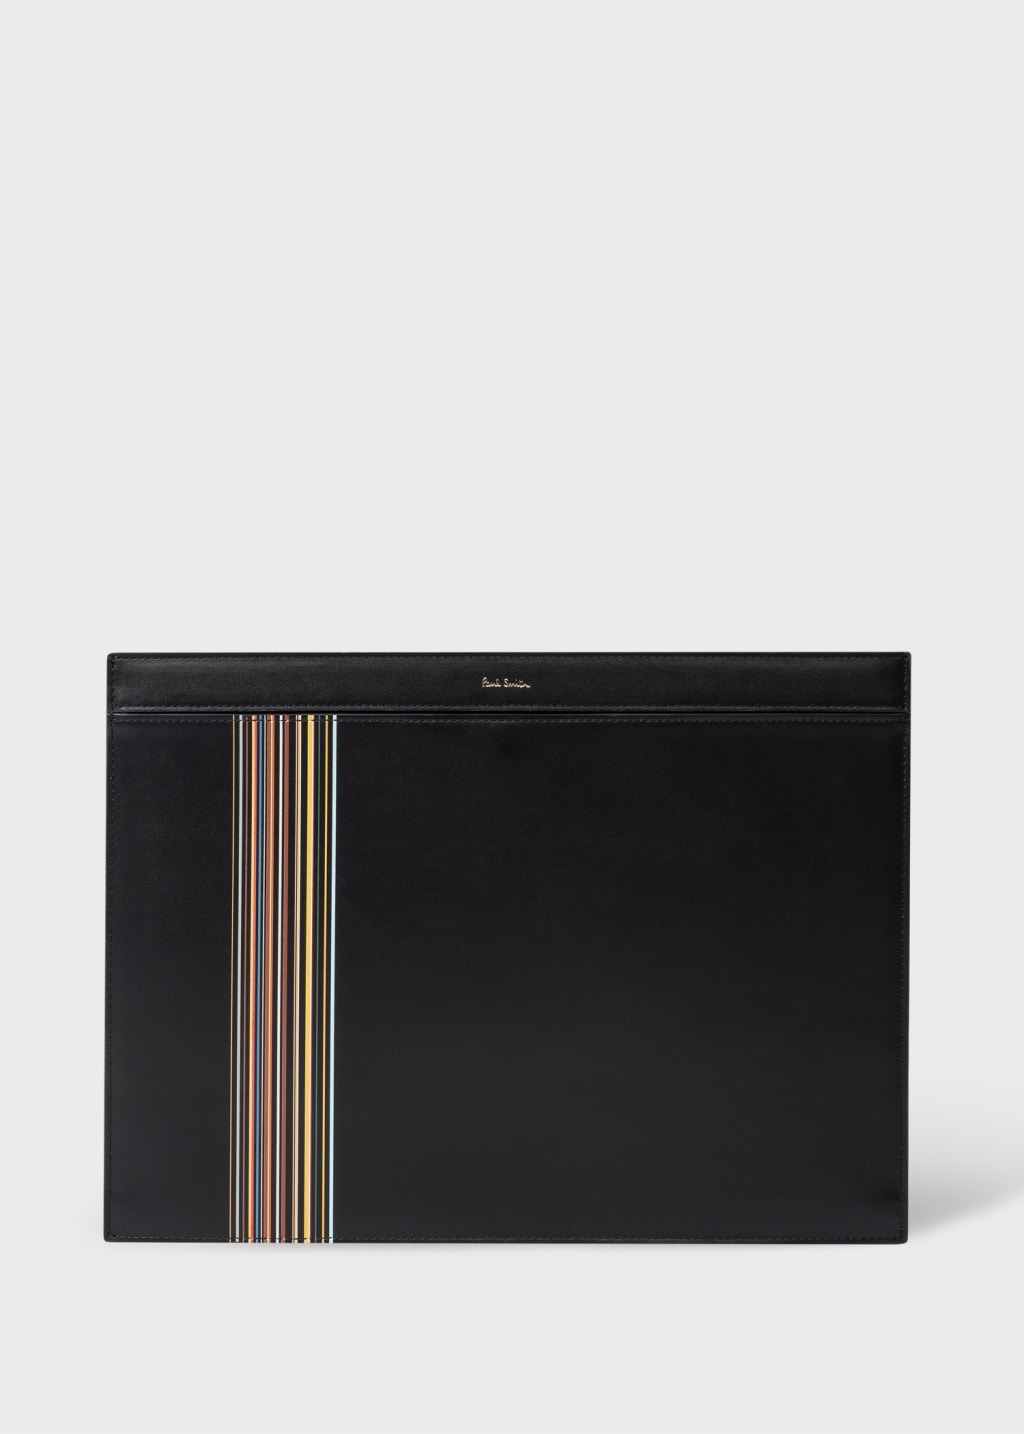 Product View - Black Leather 'Signature Stripe Block' Document Case by Paul Smith